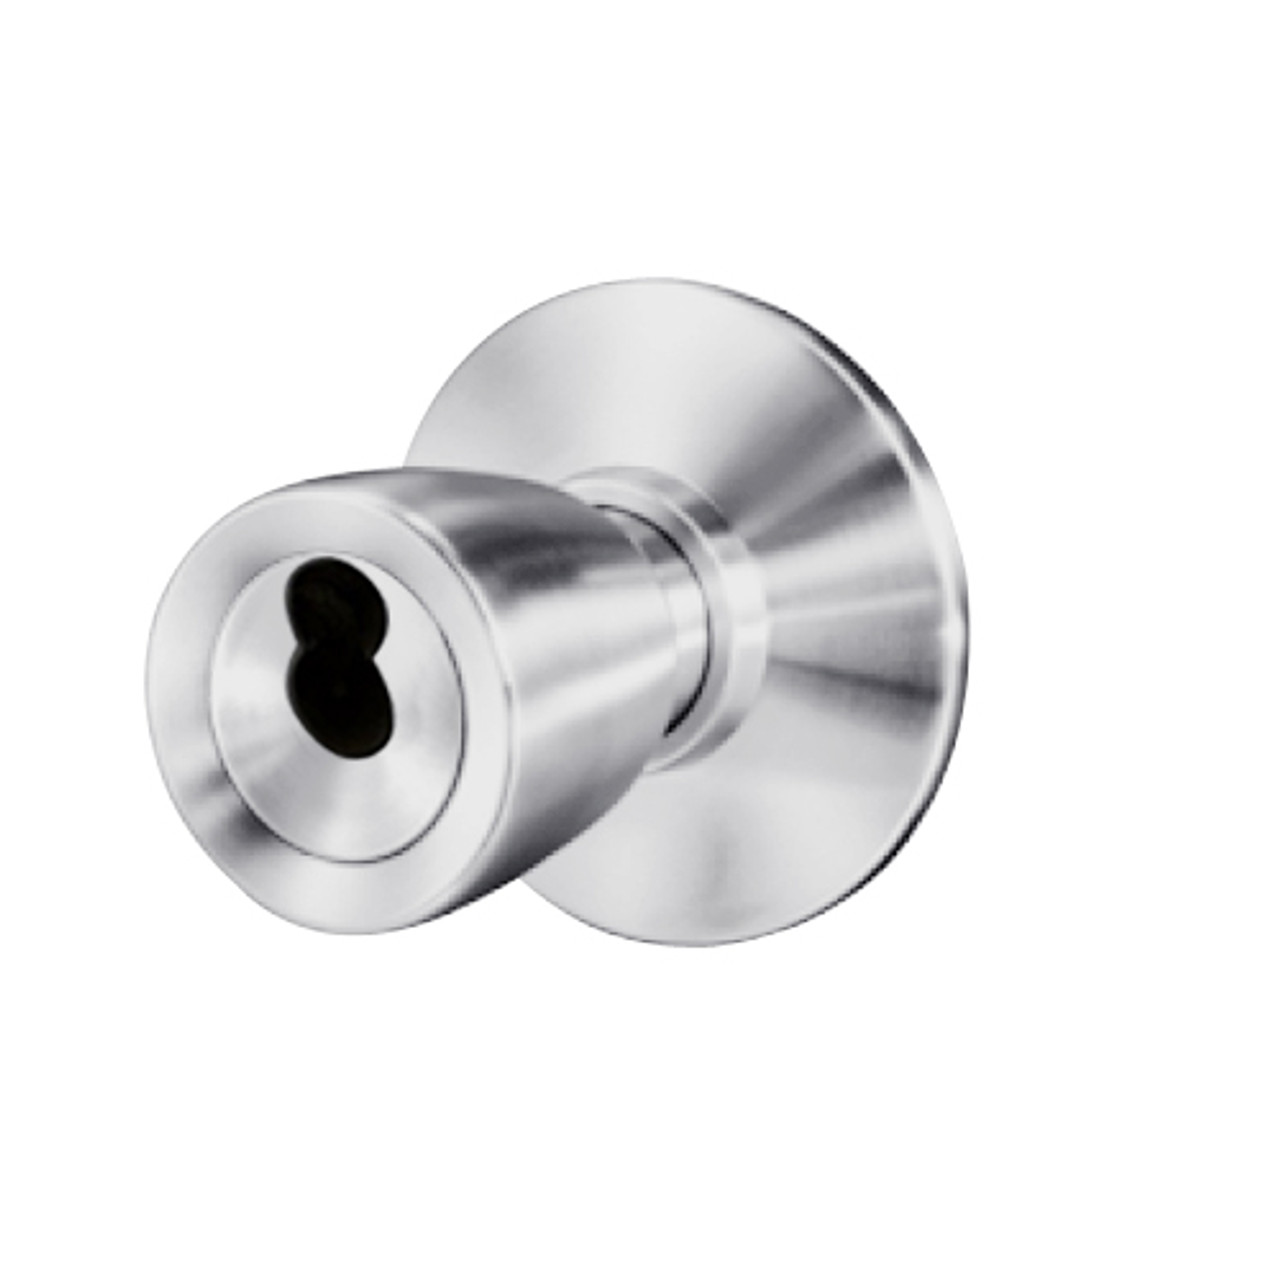 8K57YD6DS3626 Best 8K Series Exit Heavy Duty Cylindrical Knob Locks with Tulip Style in Satin Chrome